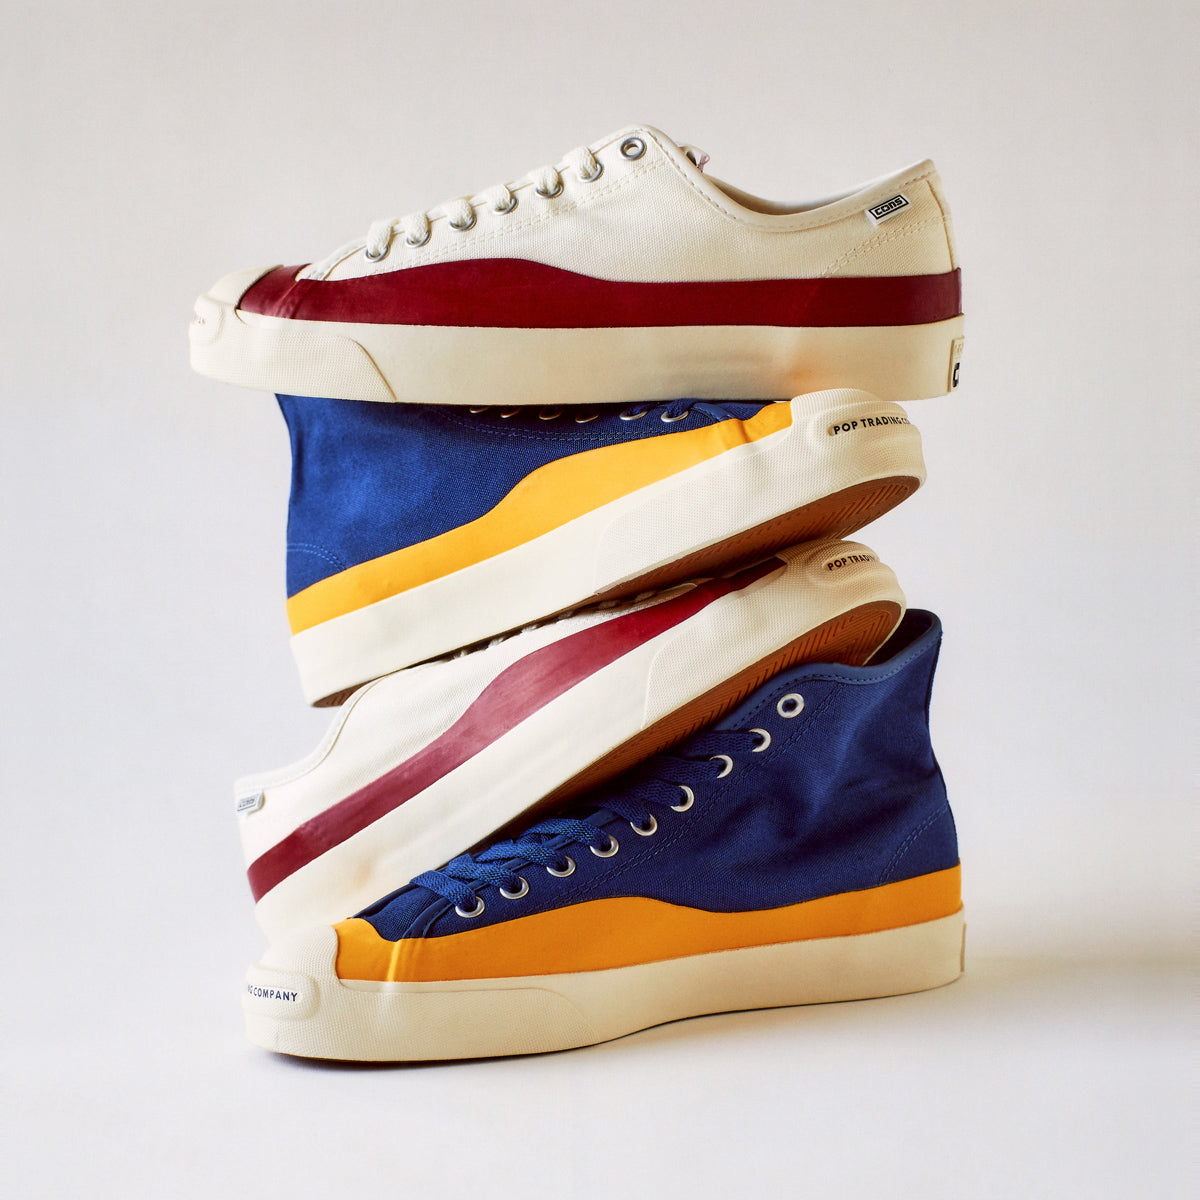 Pop Trading Company Reworks The Converse CONS Jack Purcell Pro